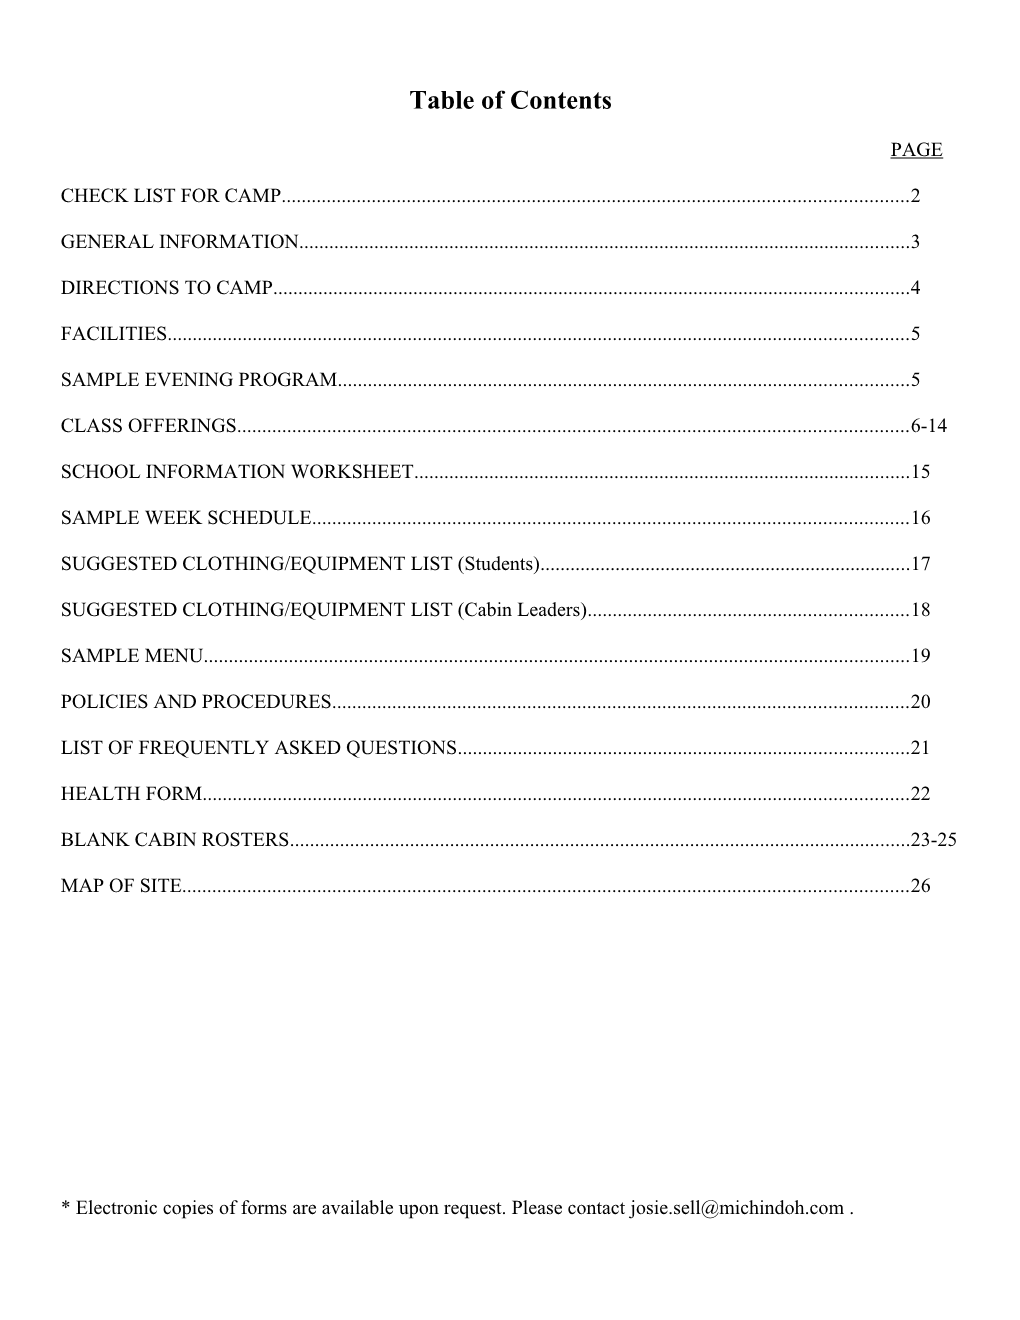 Table of Contents s320